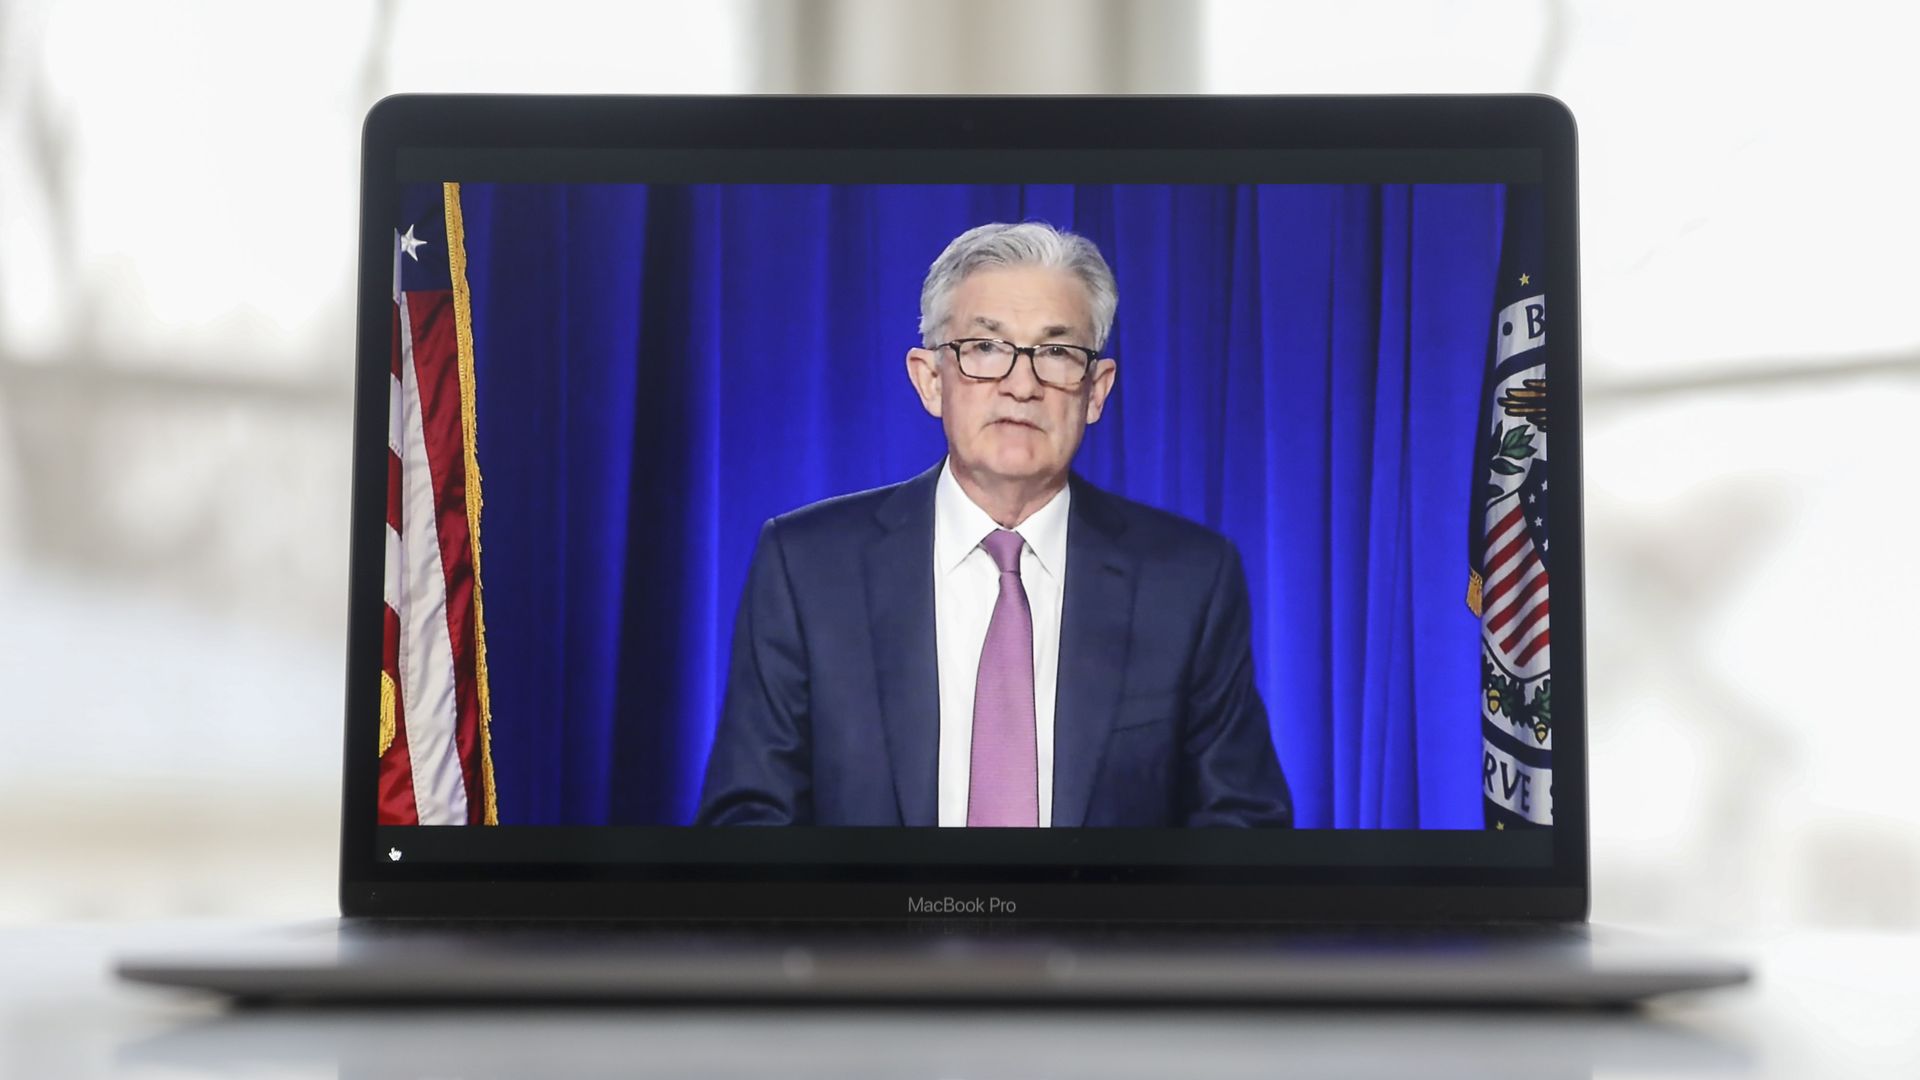 Federal Reserve Chairman Jerome Powell is seen on a laptop screen during a virtual news conference.